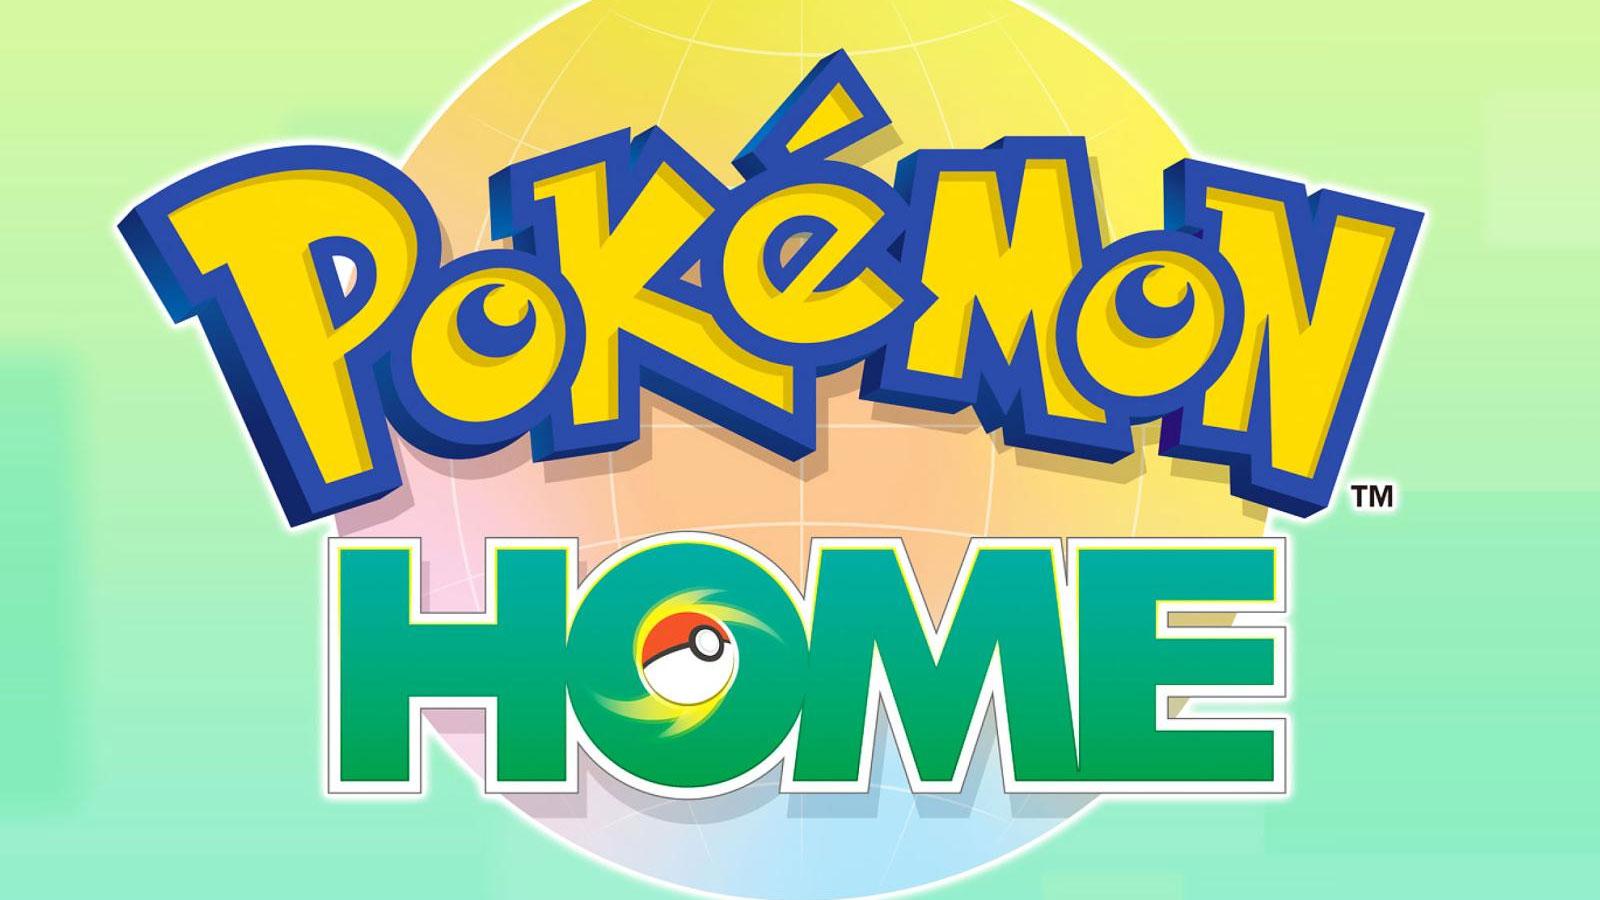 Pokemon Home 3.0 update and S/V compatibility arriving ~~May 24th~~  ~~Soon~~ MAY 30TH FOR REAL THIS TIME, Page 3